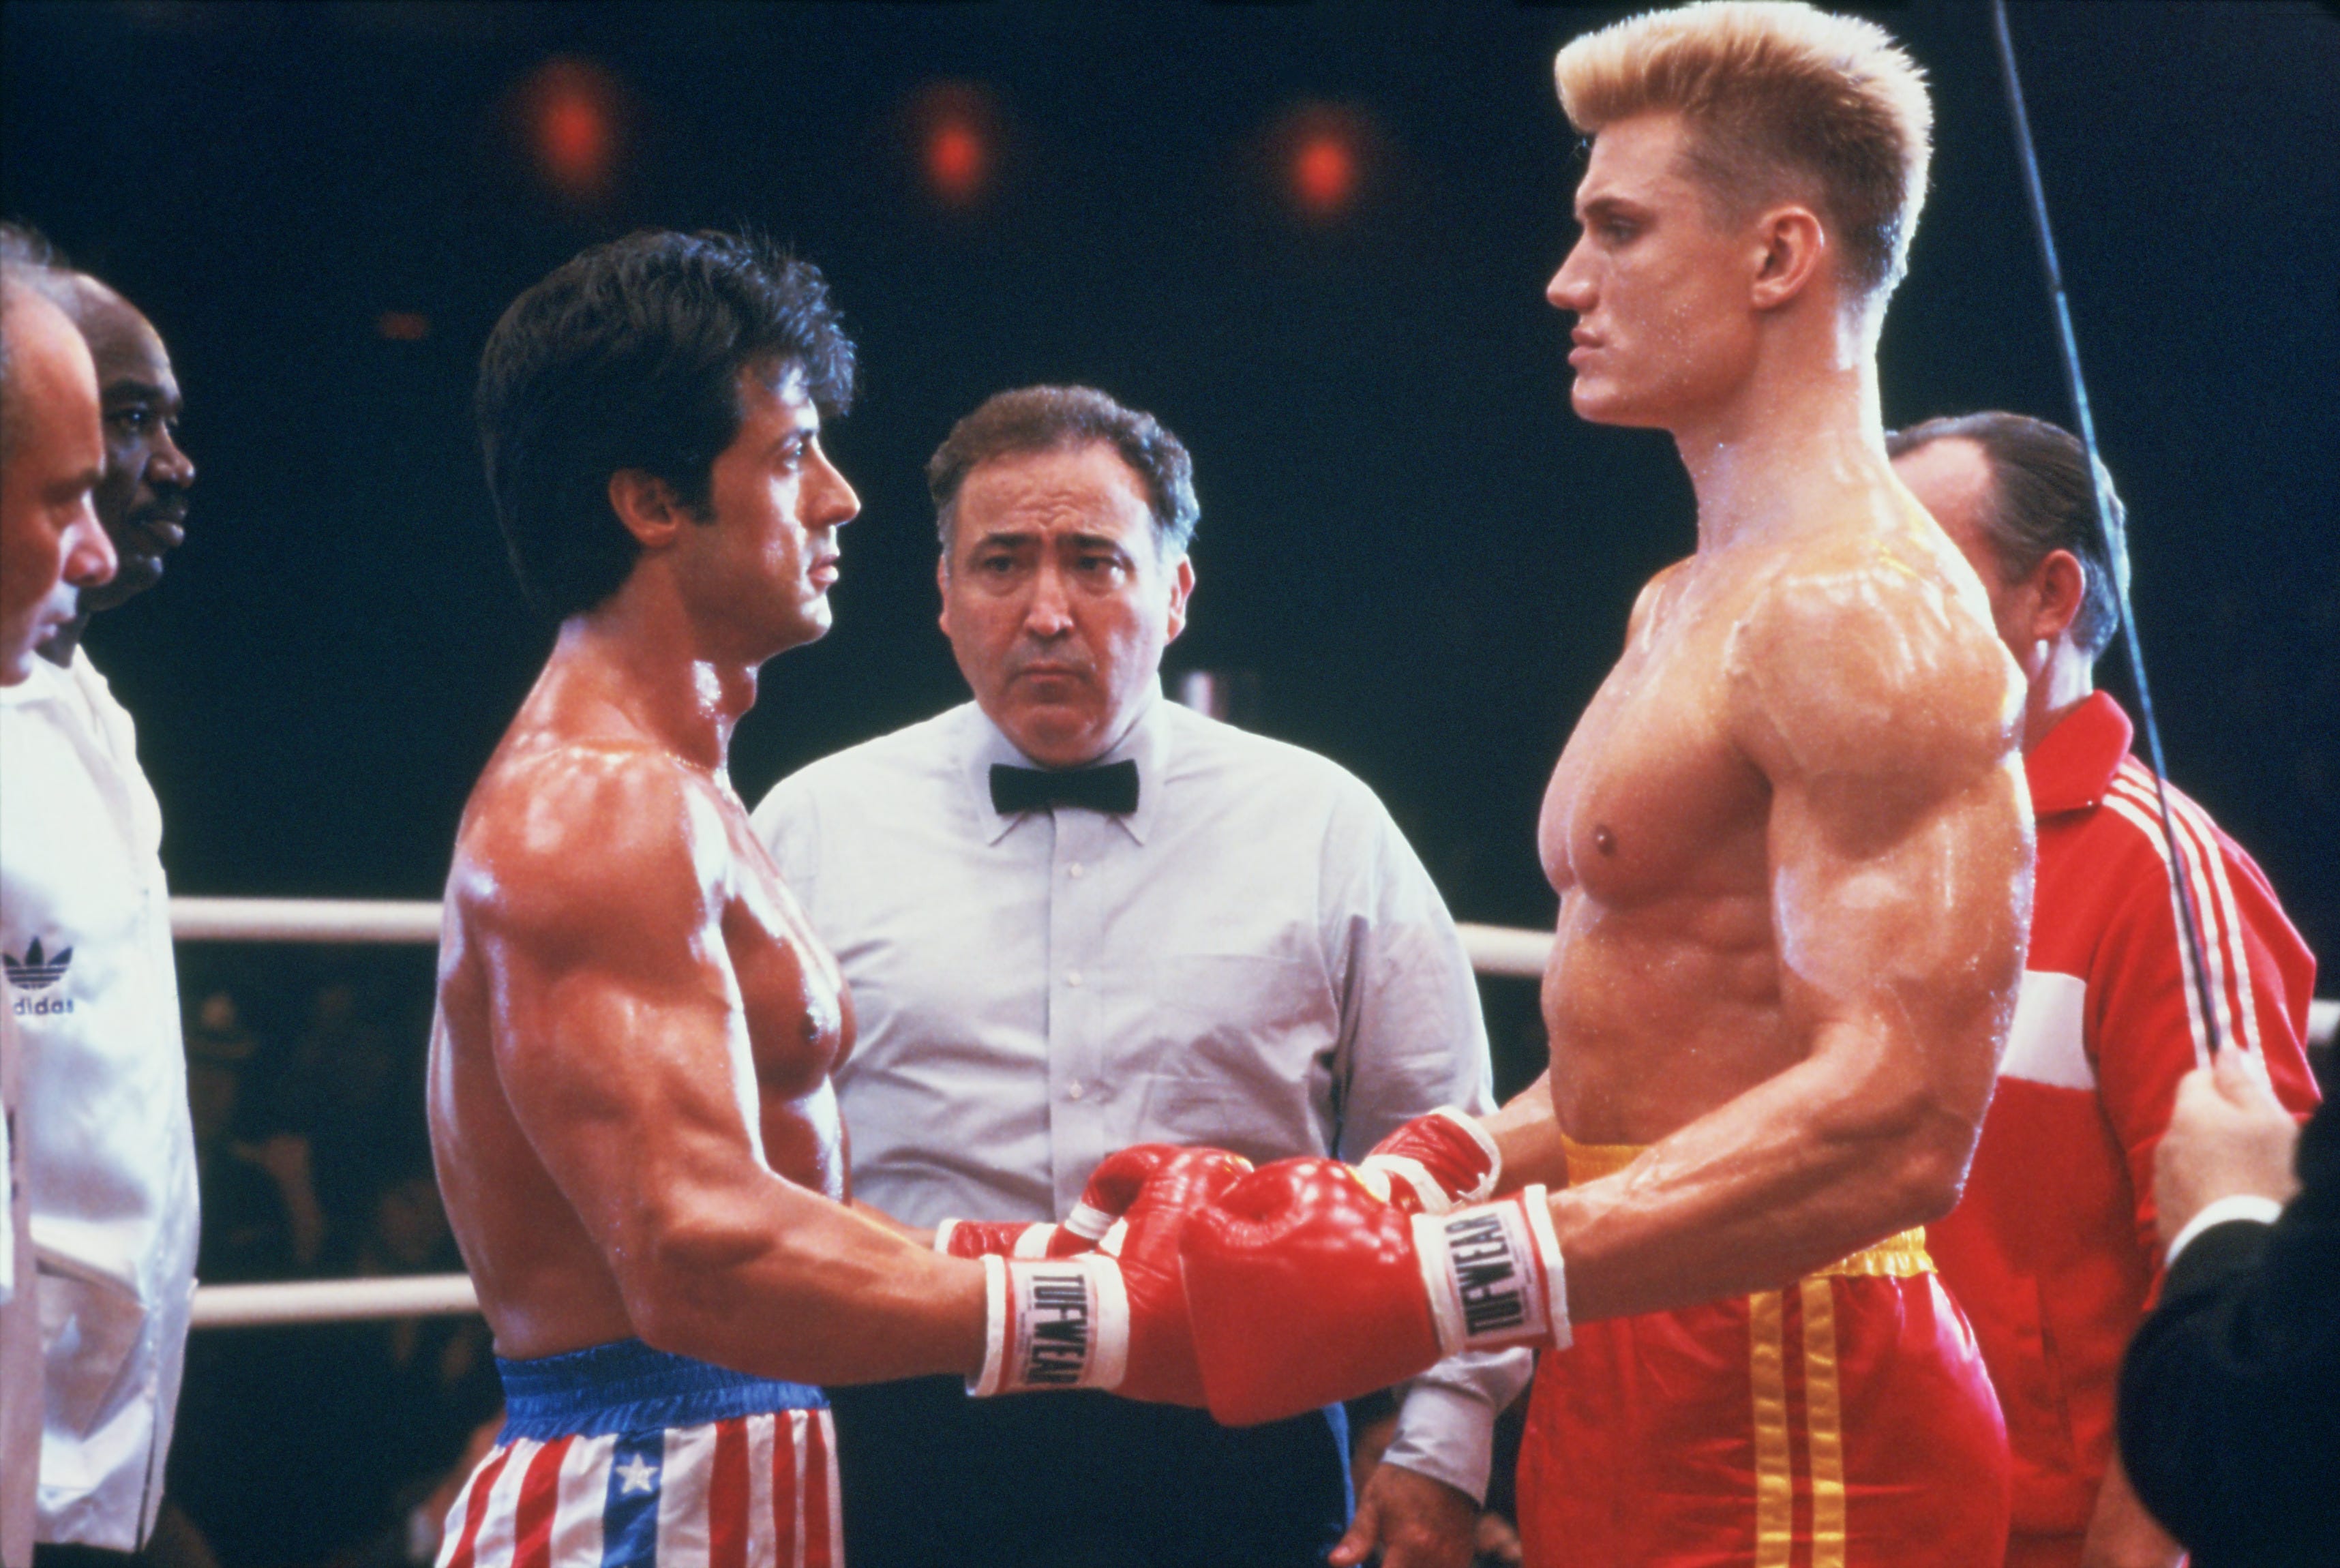 Creed 2' rewrites Dolph Lundgren's 'Rocky IV' cold saga (spoilers!)